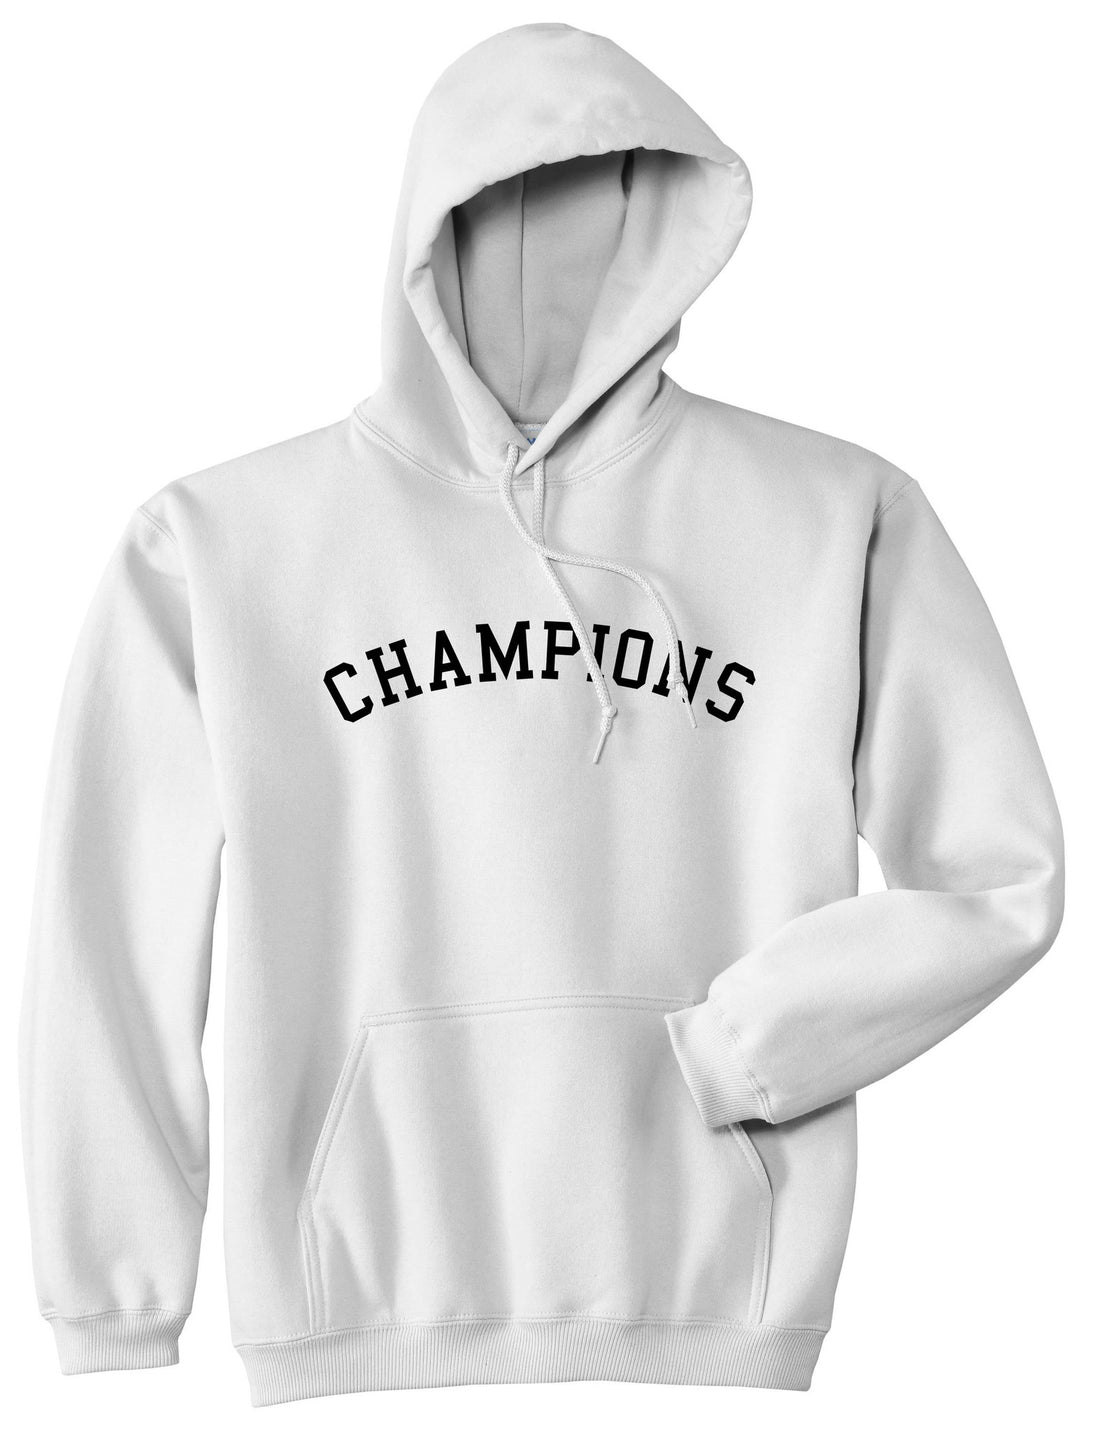 Champions Pullover Hoodie Hoody in White by Kings Of NY